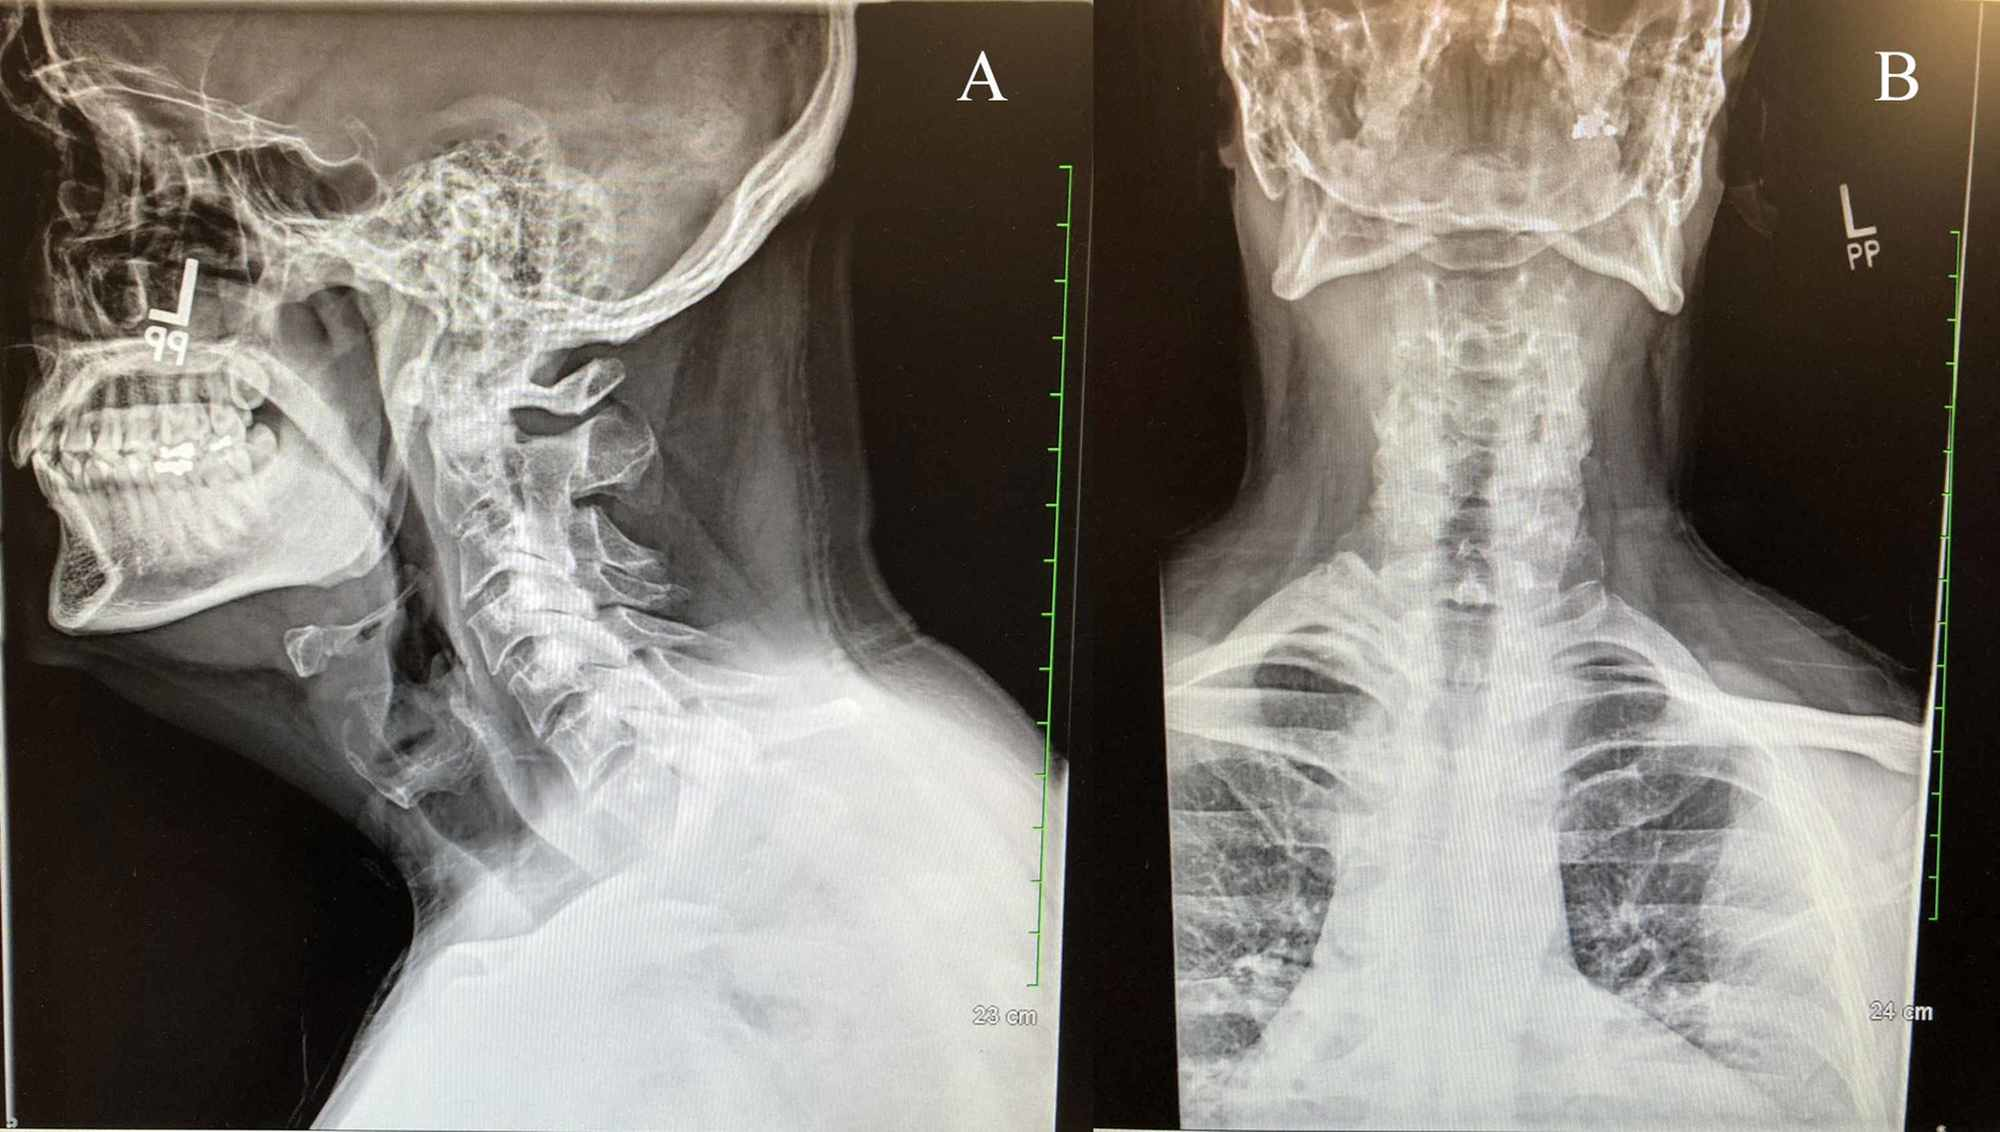 infection of the cervical spine x ray